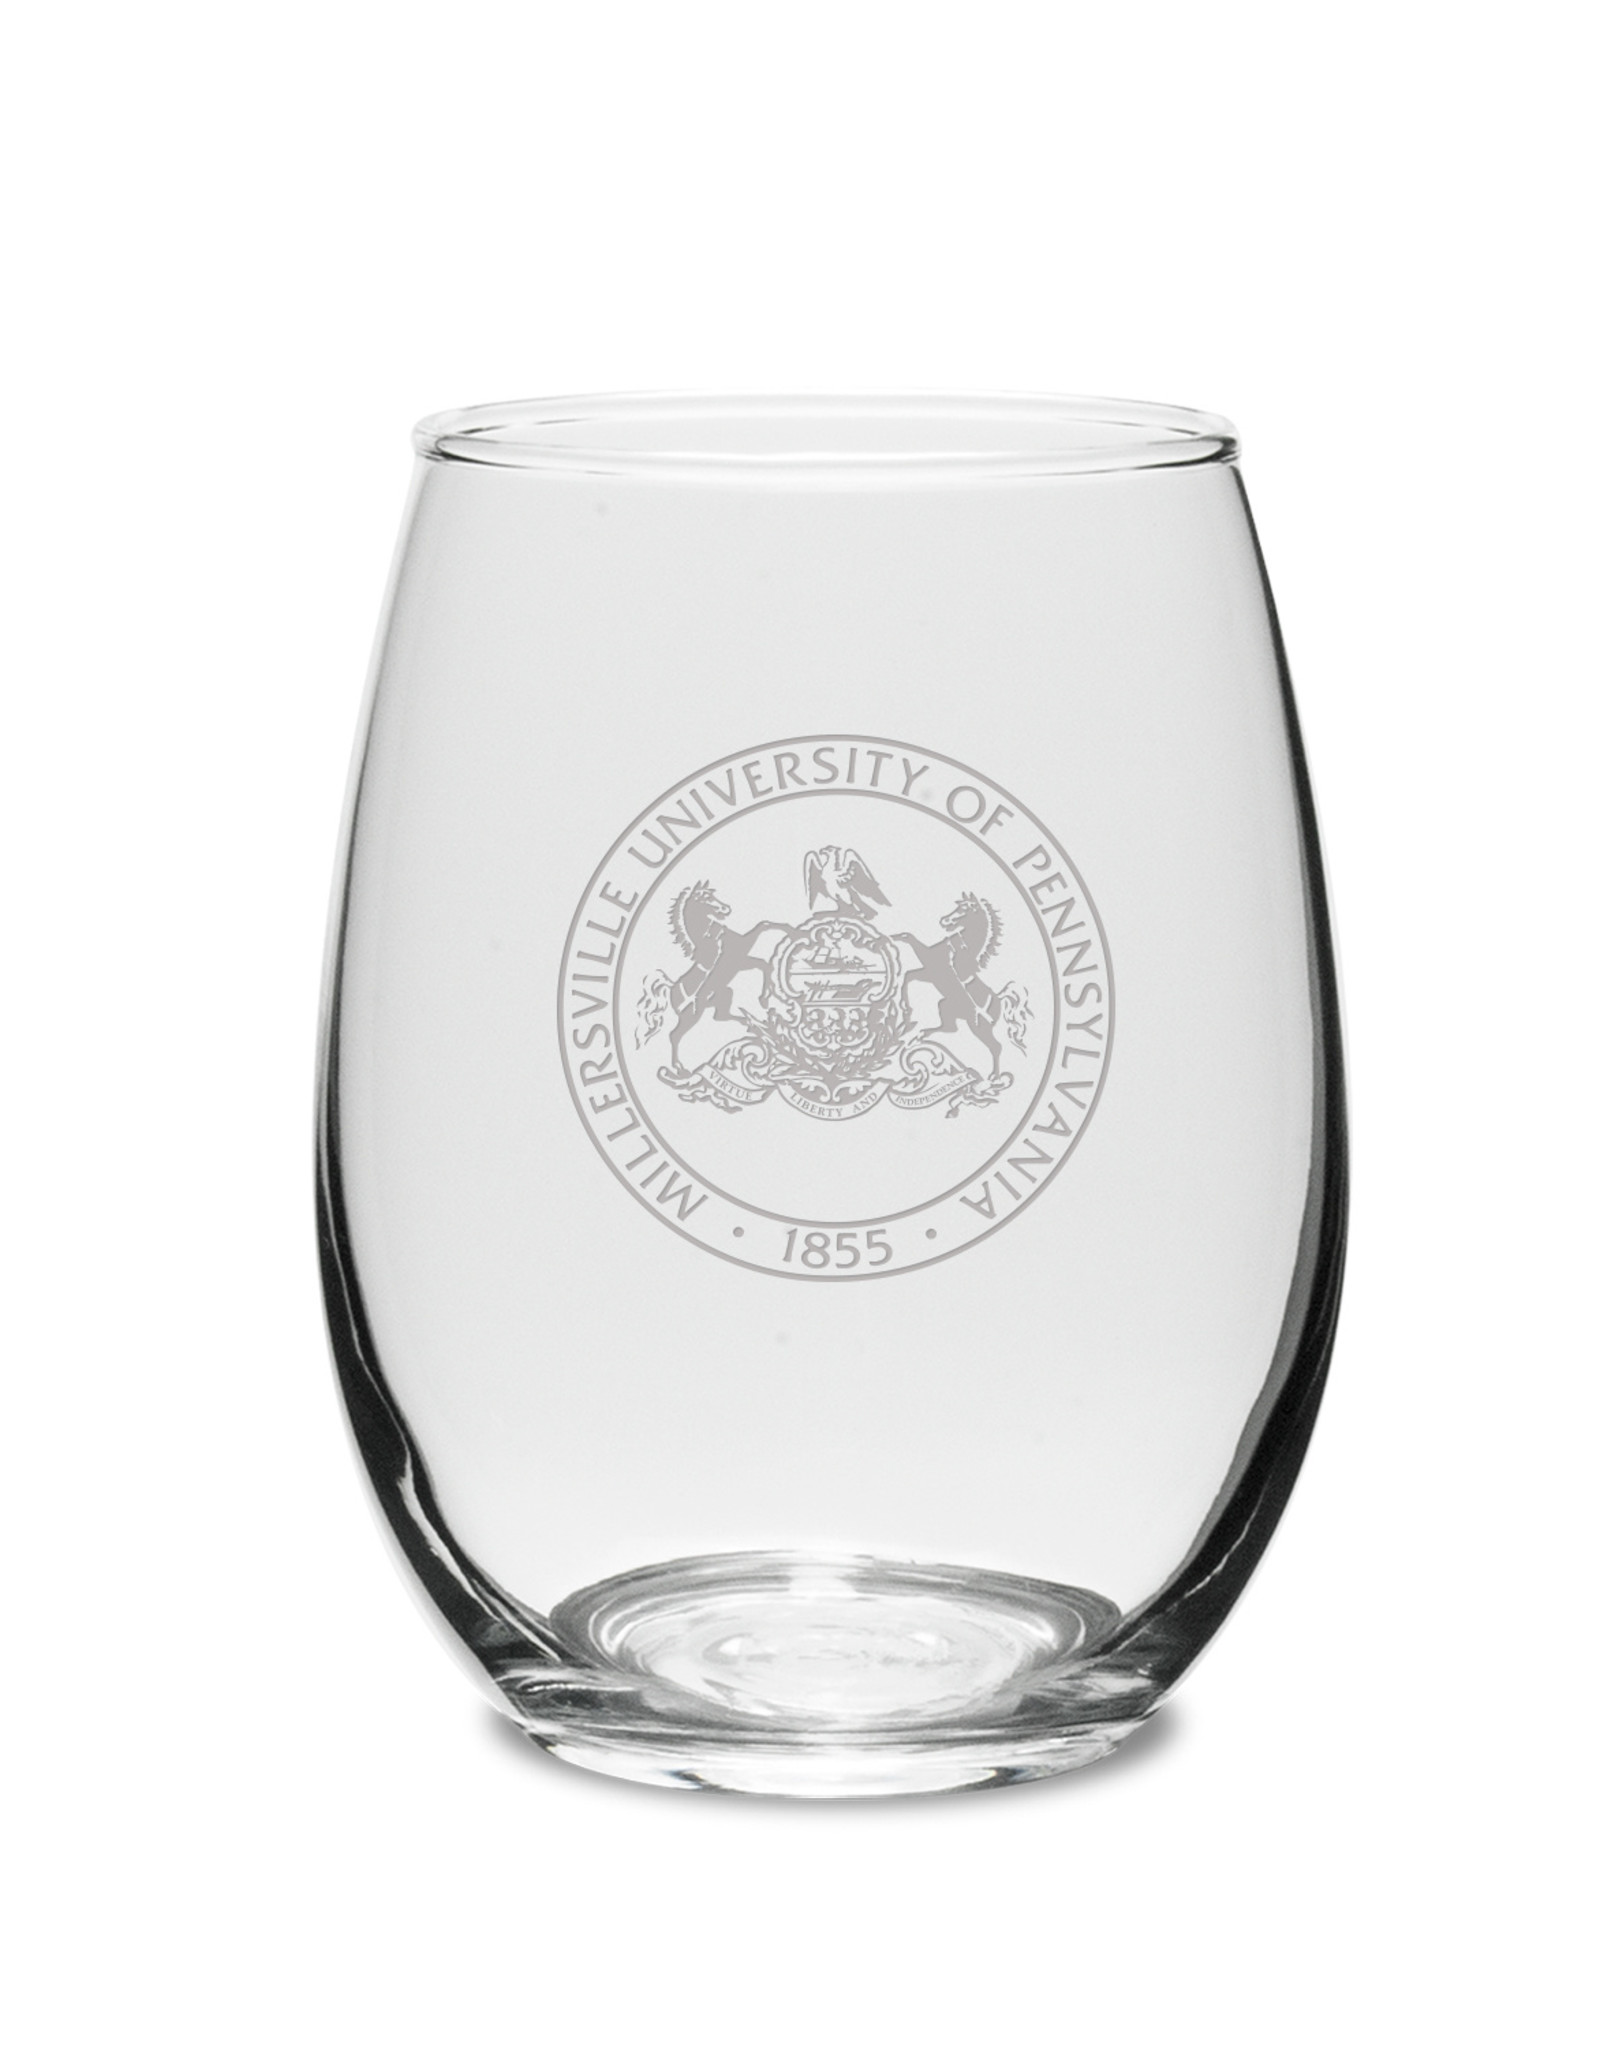 White House Presidential Seal Made in USA stemless wine drinking